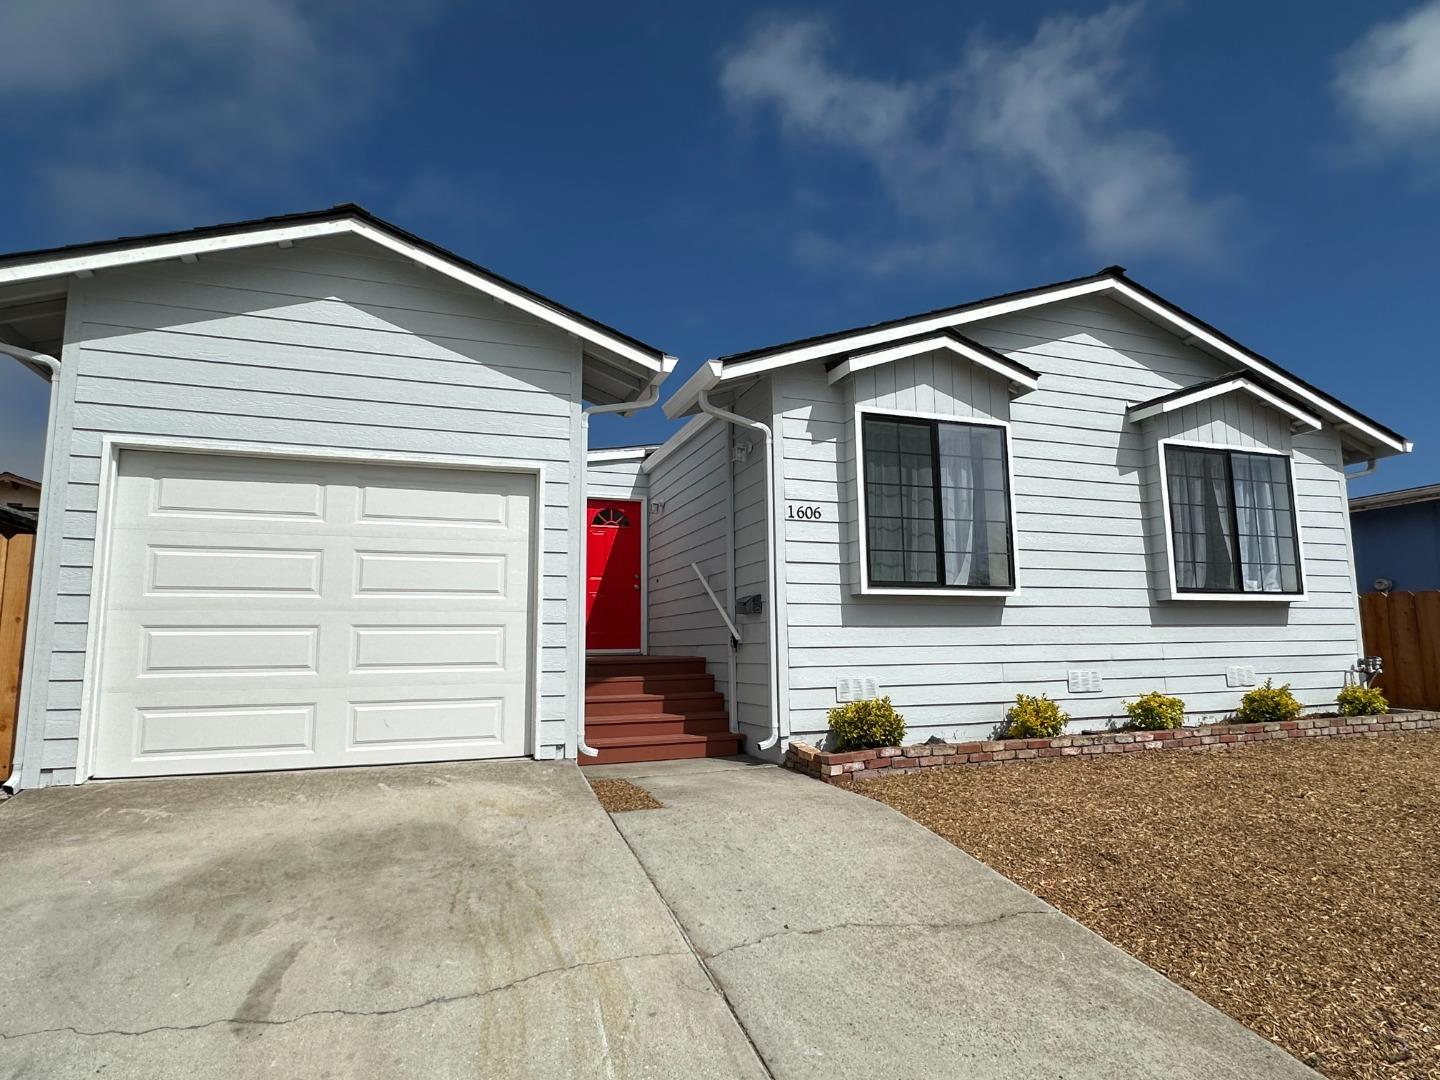 Photo of 1606 Judson St in Seaside, CA